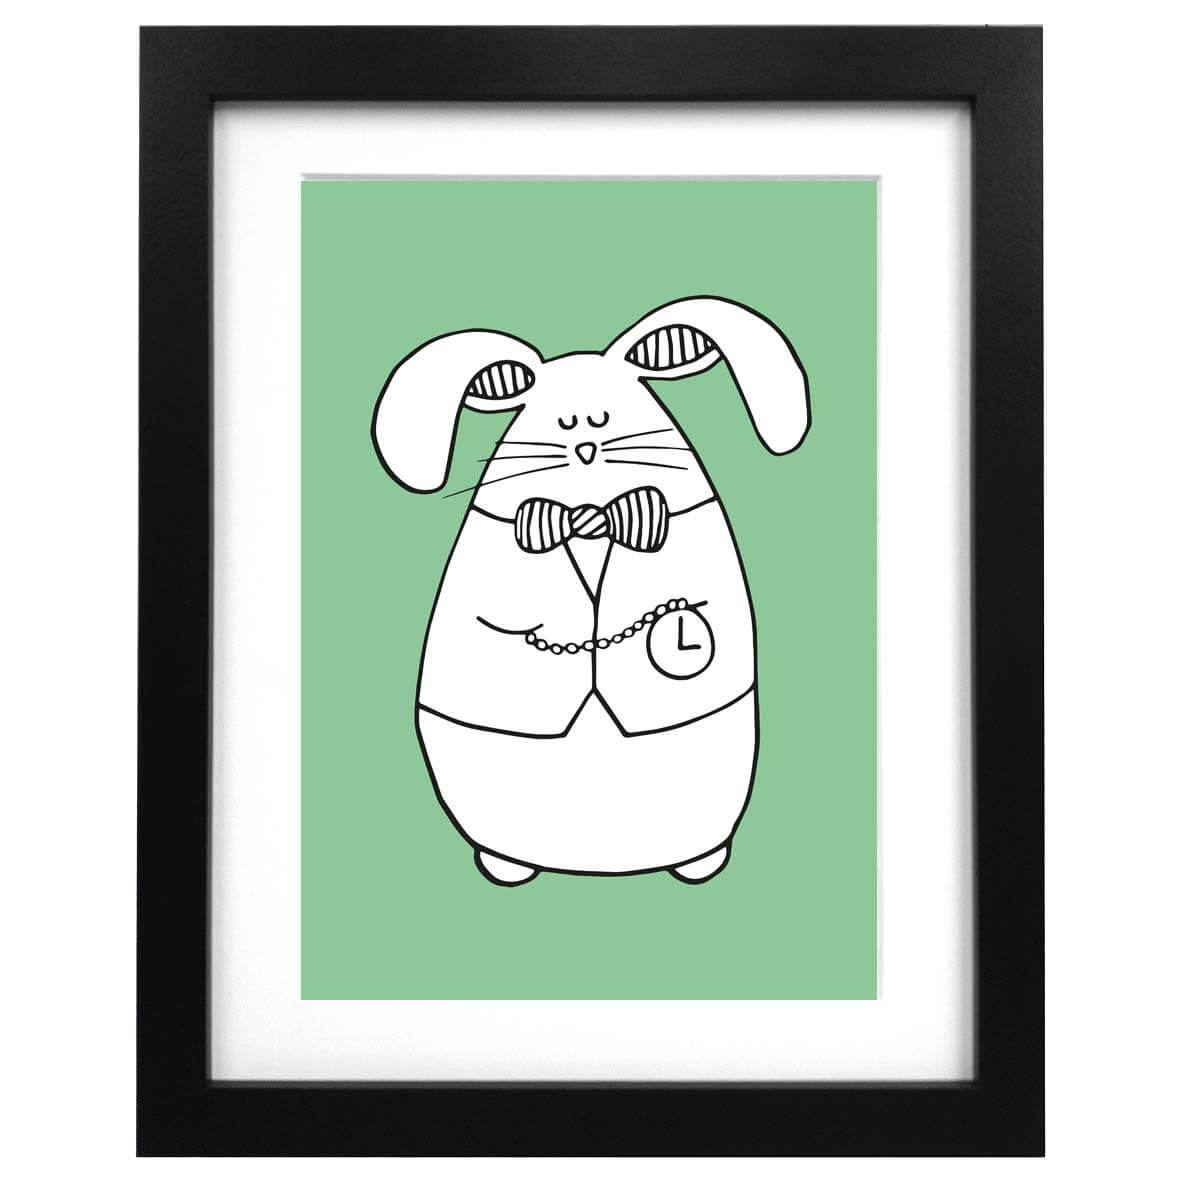 Green A3 sized art print with an illustration of a white rabbit